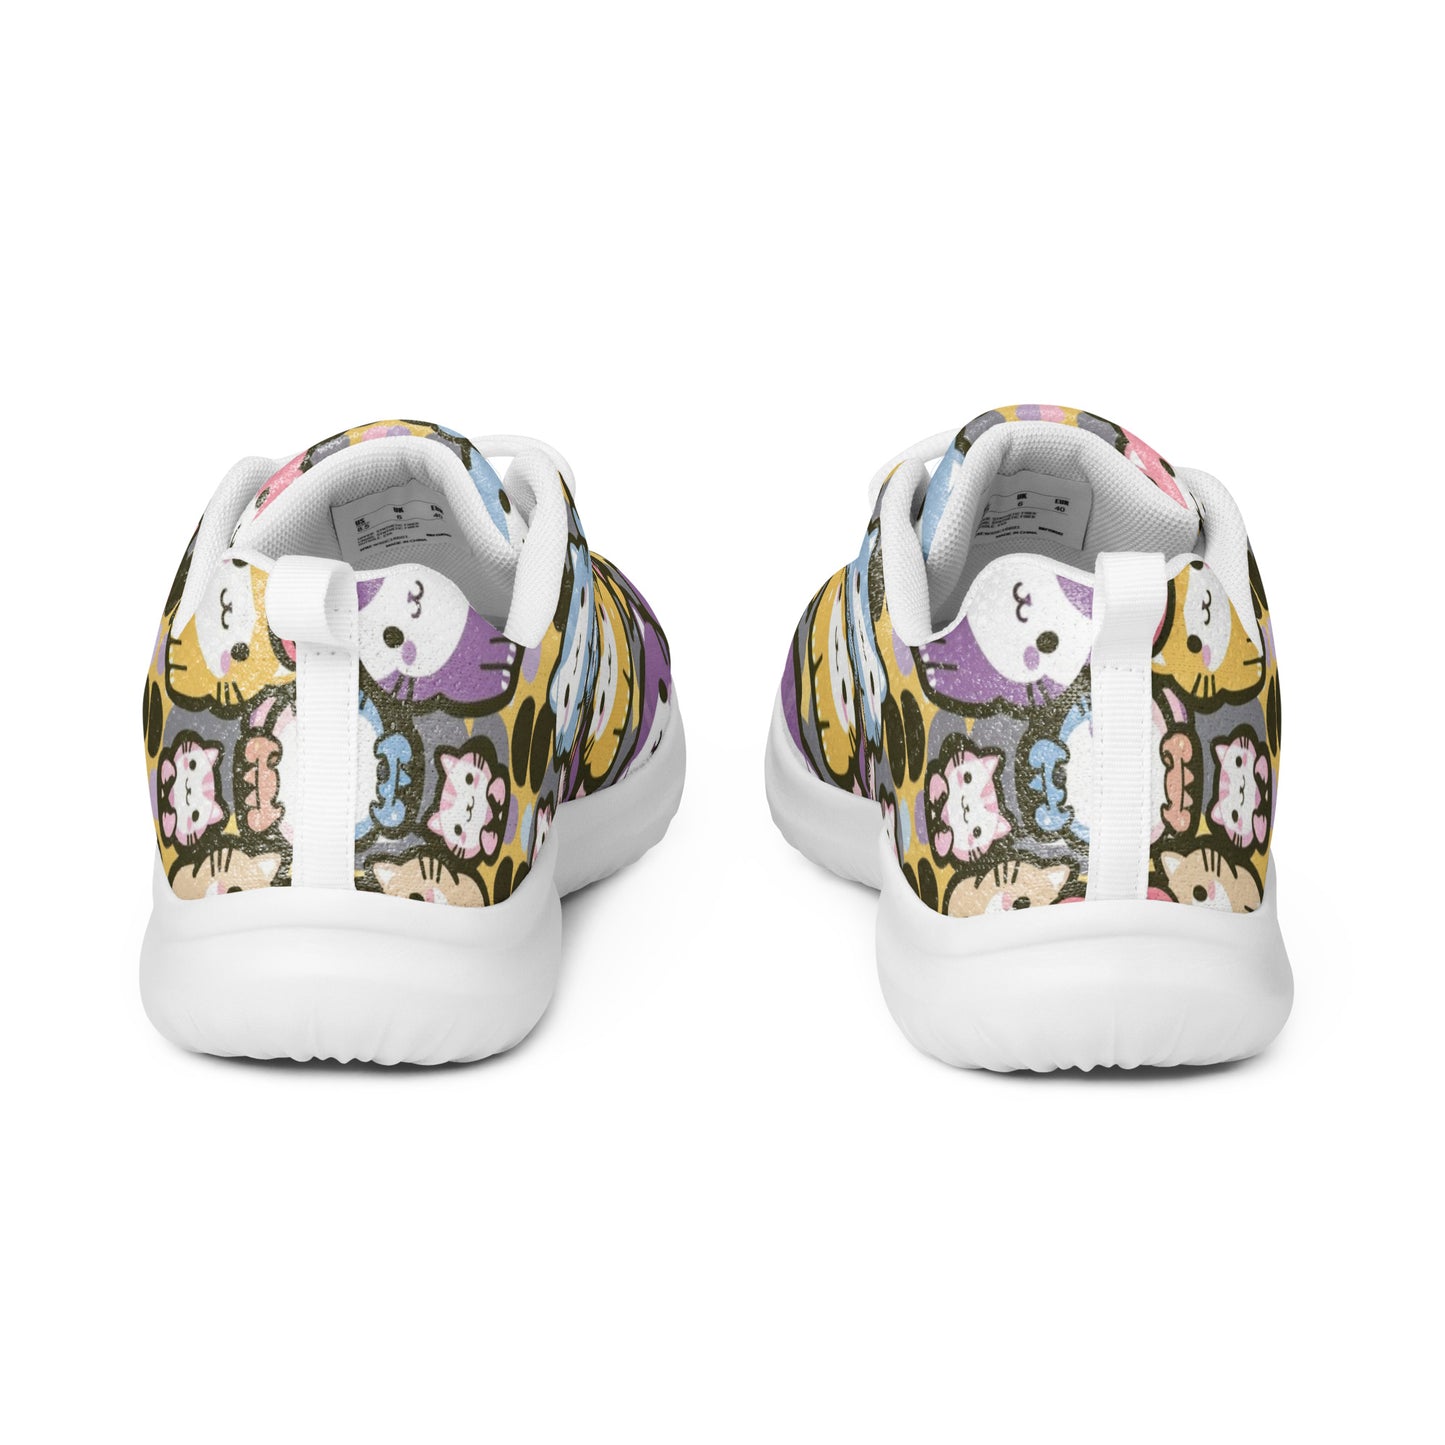 Kawaii Playful Cats Women’s athletic shoes